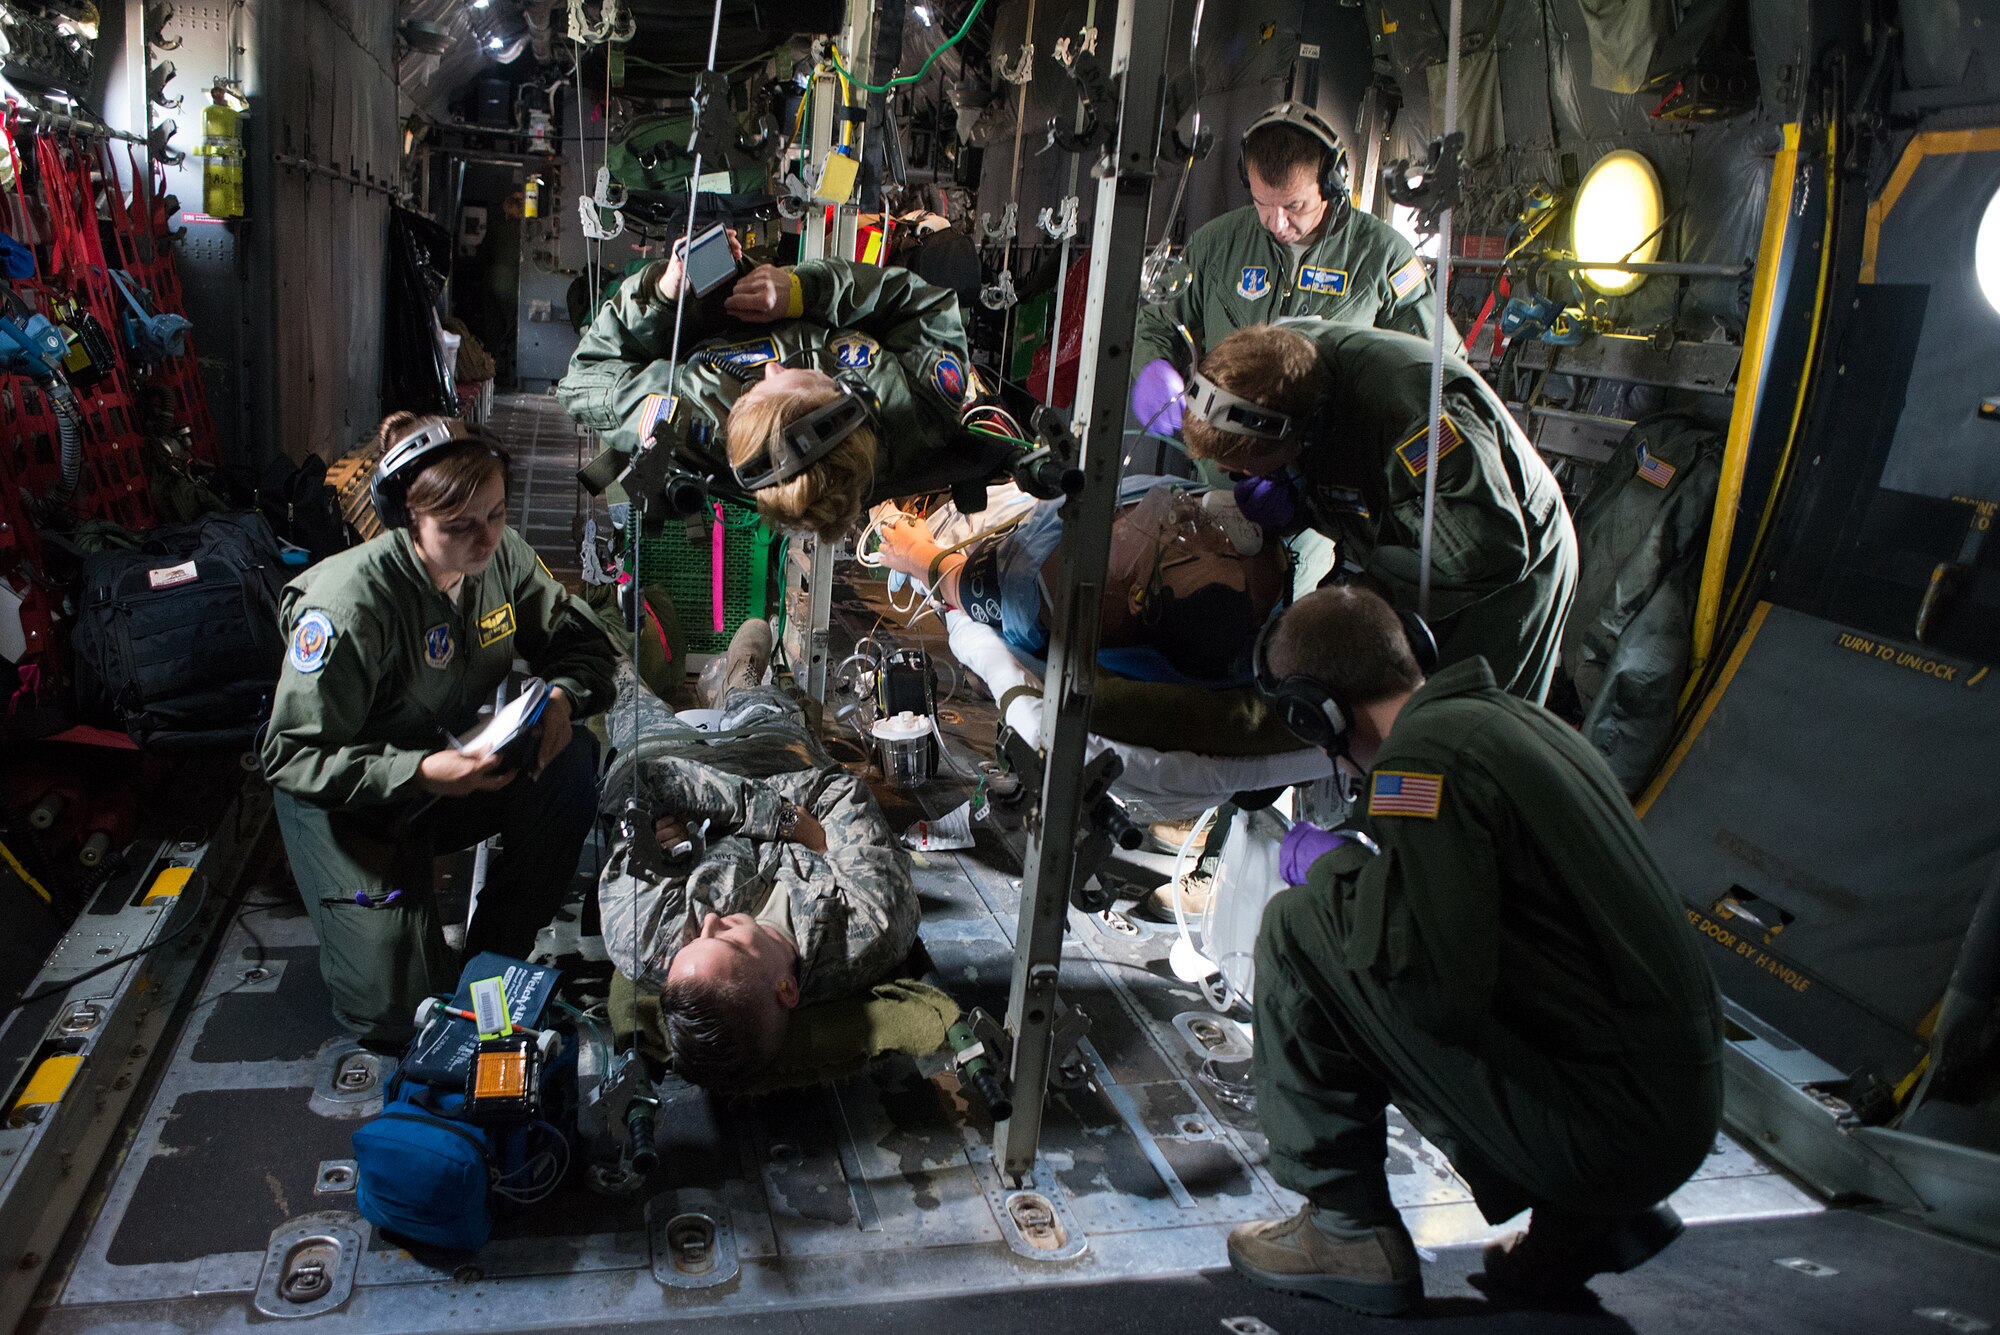 Airmen from a variety of Aeromedical Evacuation Squadrons attend to simulated medical challenges as part of the Multiple Aircraft Training Opportunity Program training event held at Will Rogers Air National Guard Base, Oklahoma City, April 15-16, 2016. The 137th Aeromedical Evacuation Squadron hosted five other aeromedical squadrons at the two day event. (U.S. Air National Guard photo by Master Sgt. Andrew LaMoreaux/Released)